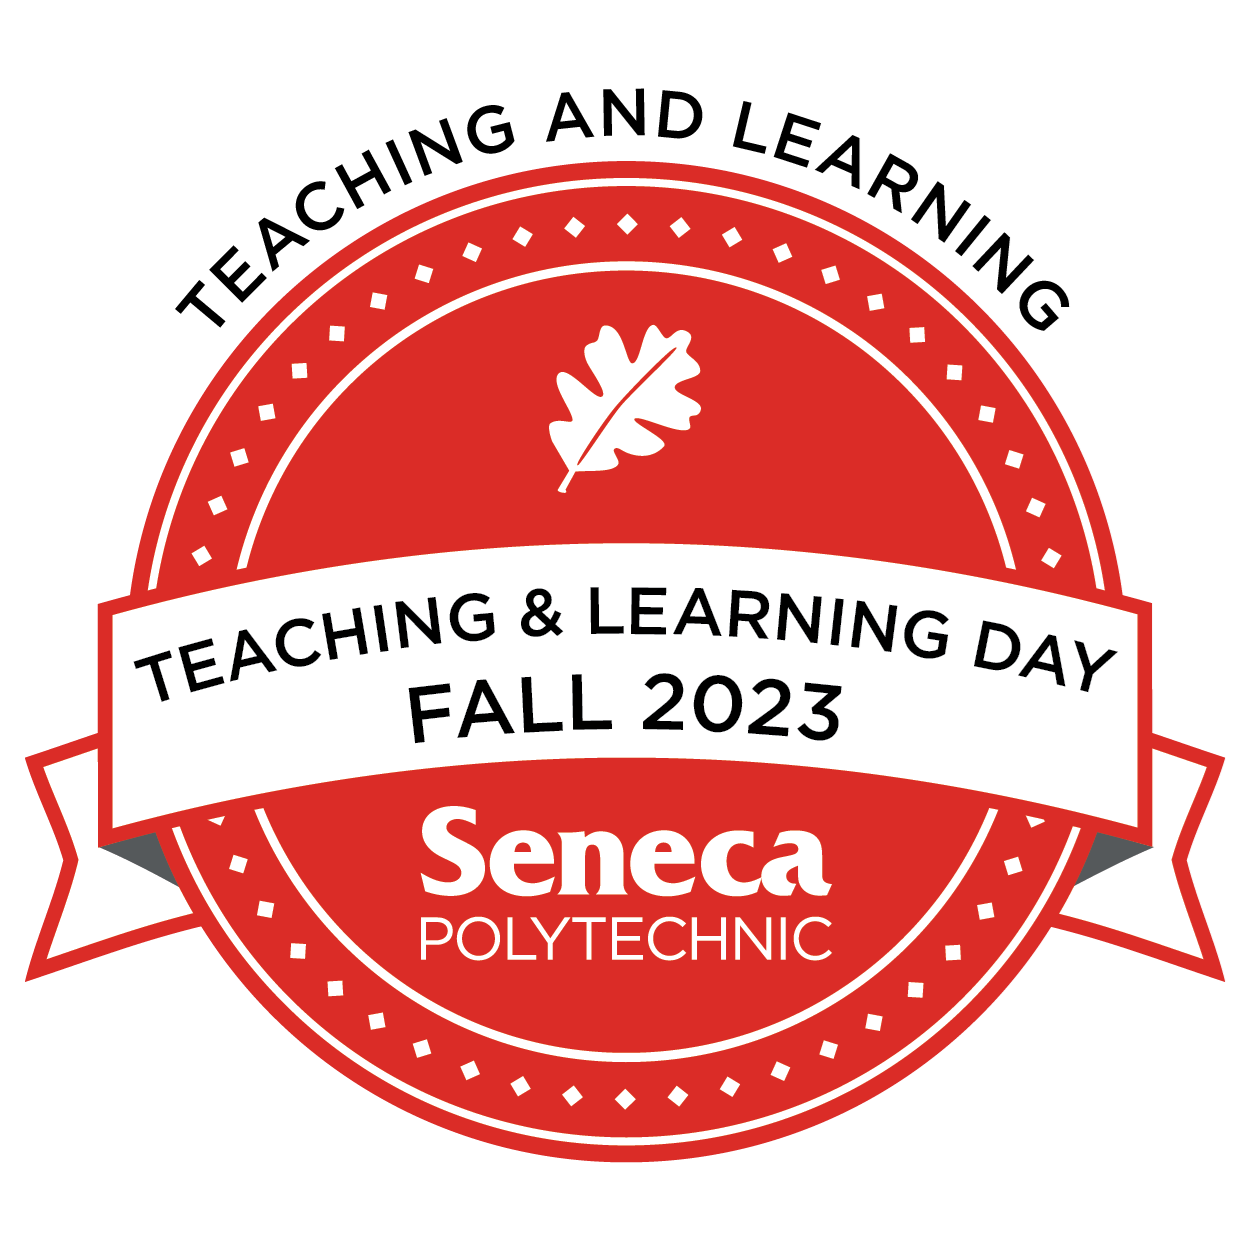 the micro-credential for Teaching & Learning Day Fall 2023